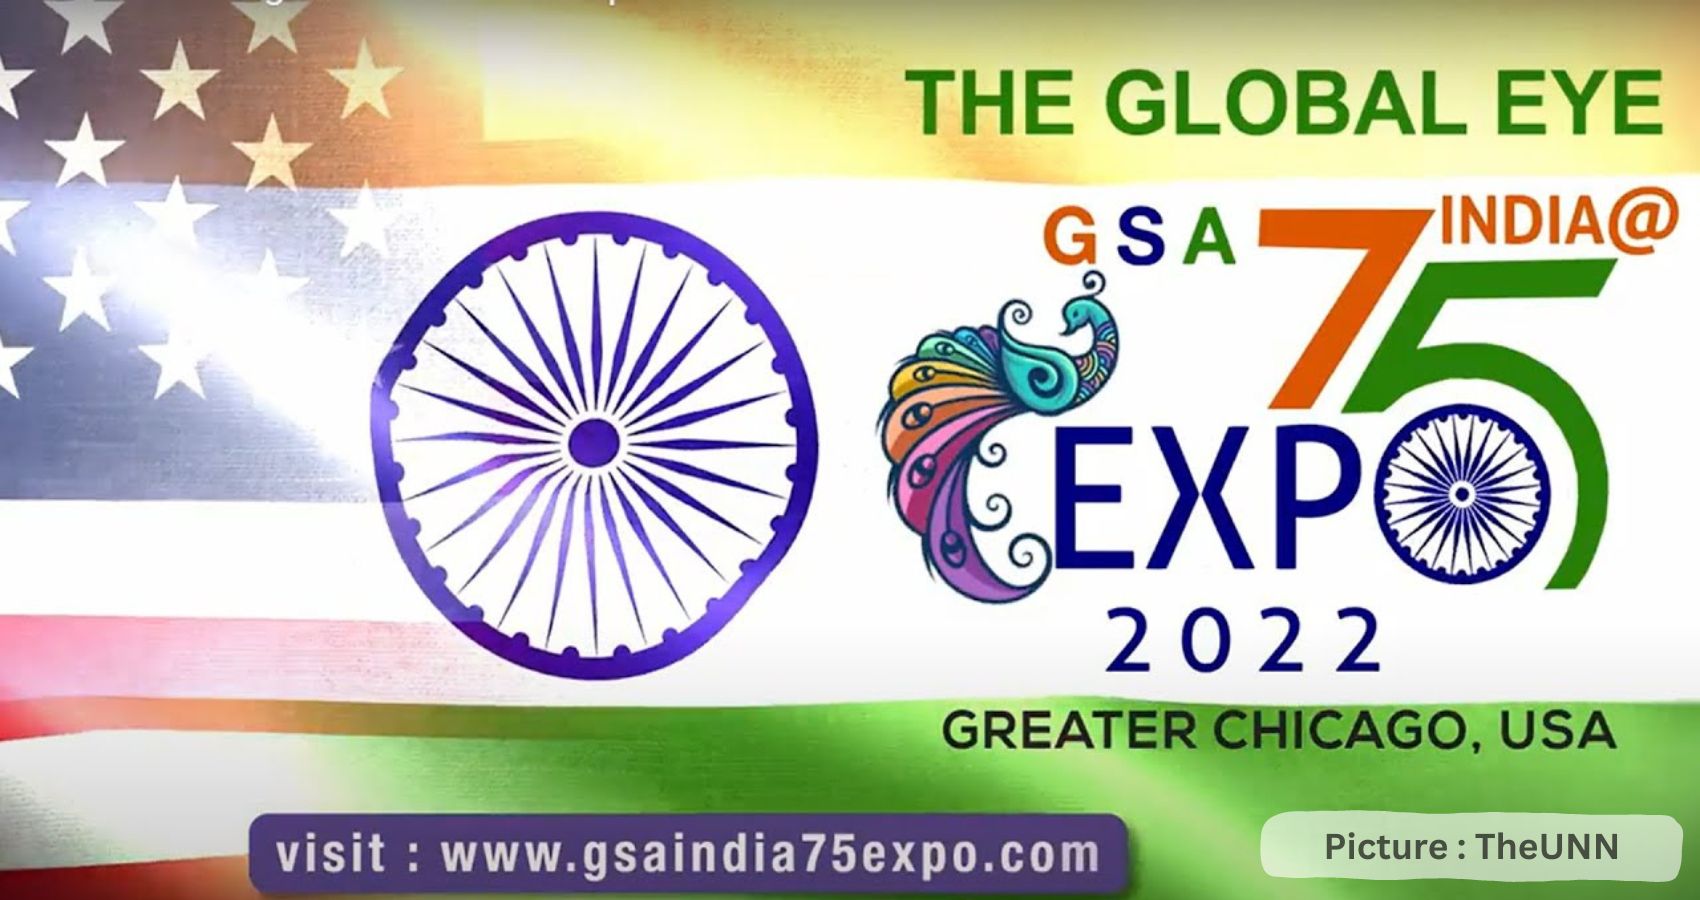 The GSA INDIA EXPO 75’s 3 Day Celebrations Planned In Chicagoland